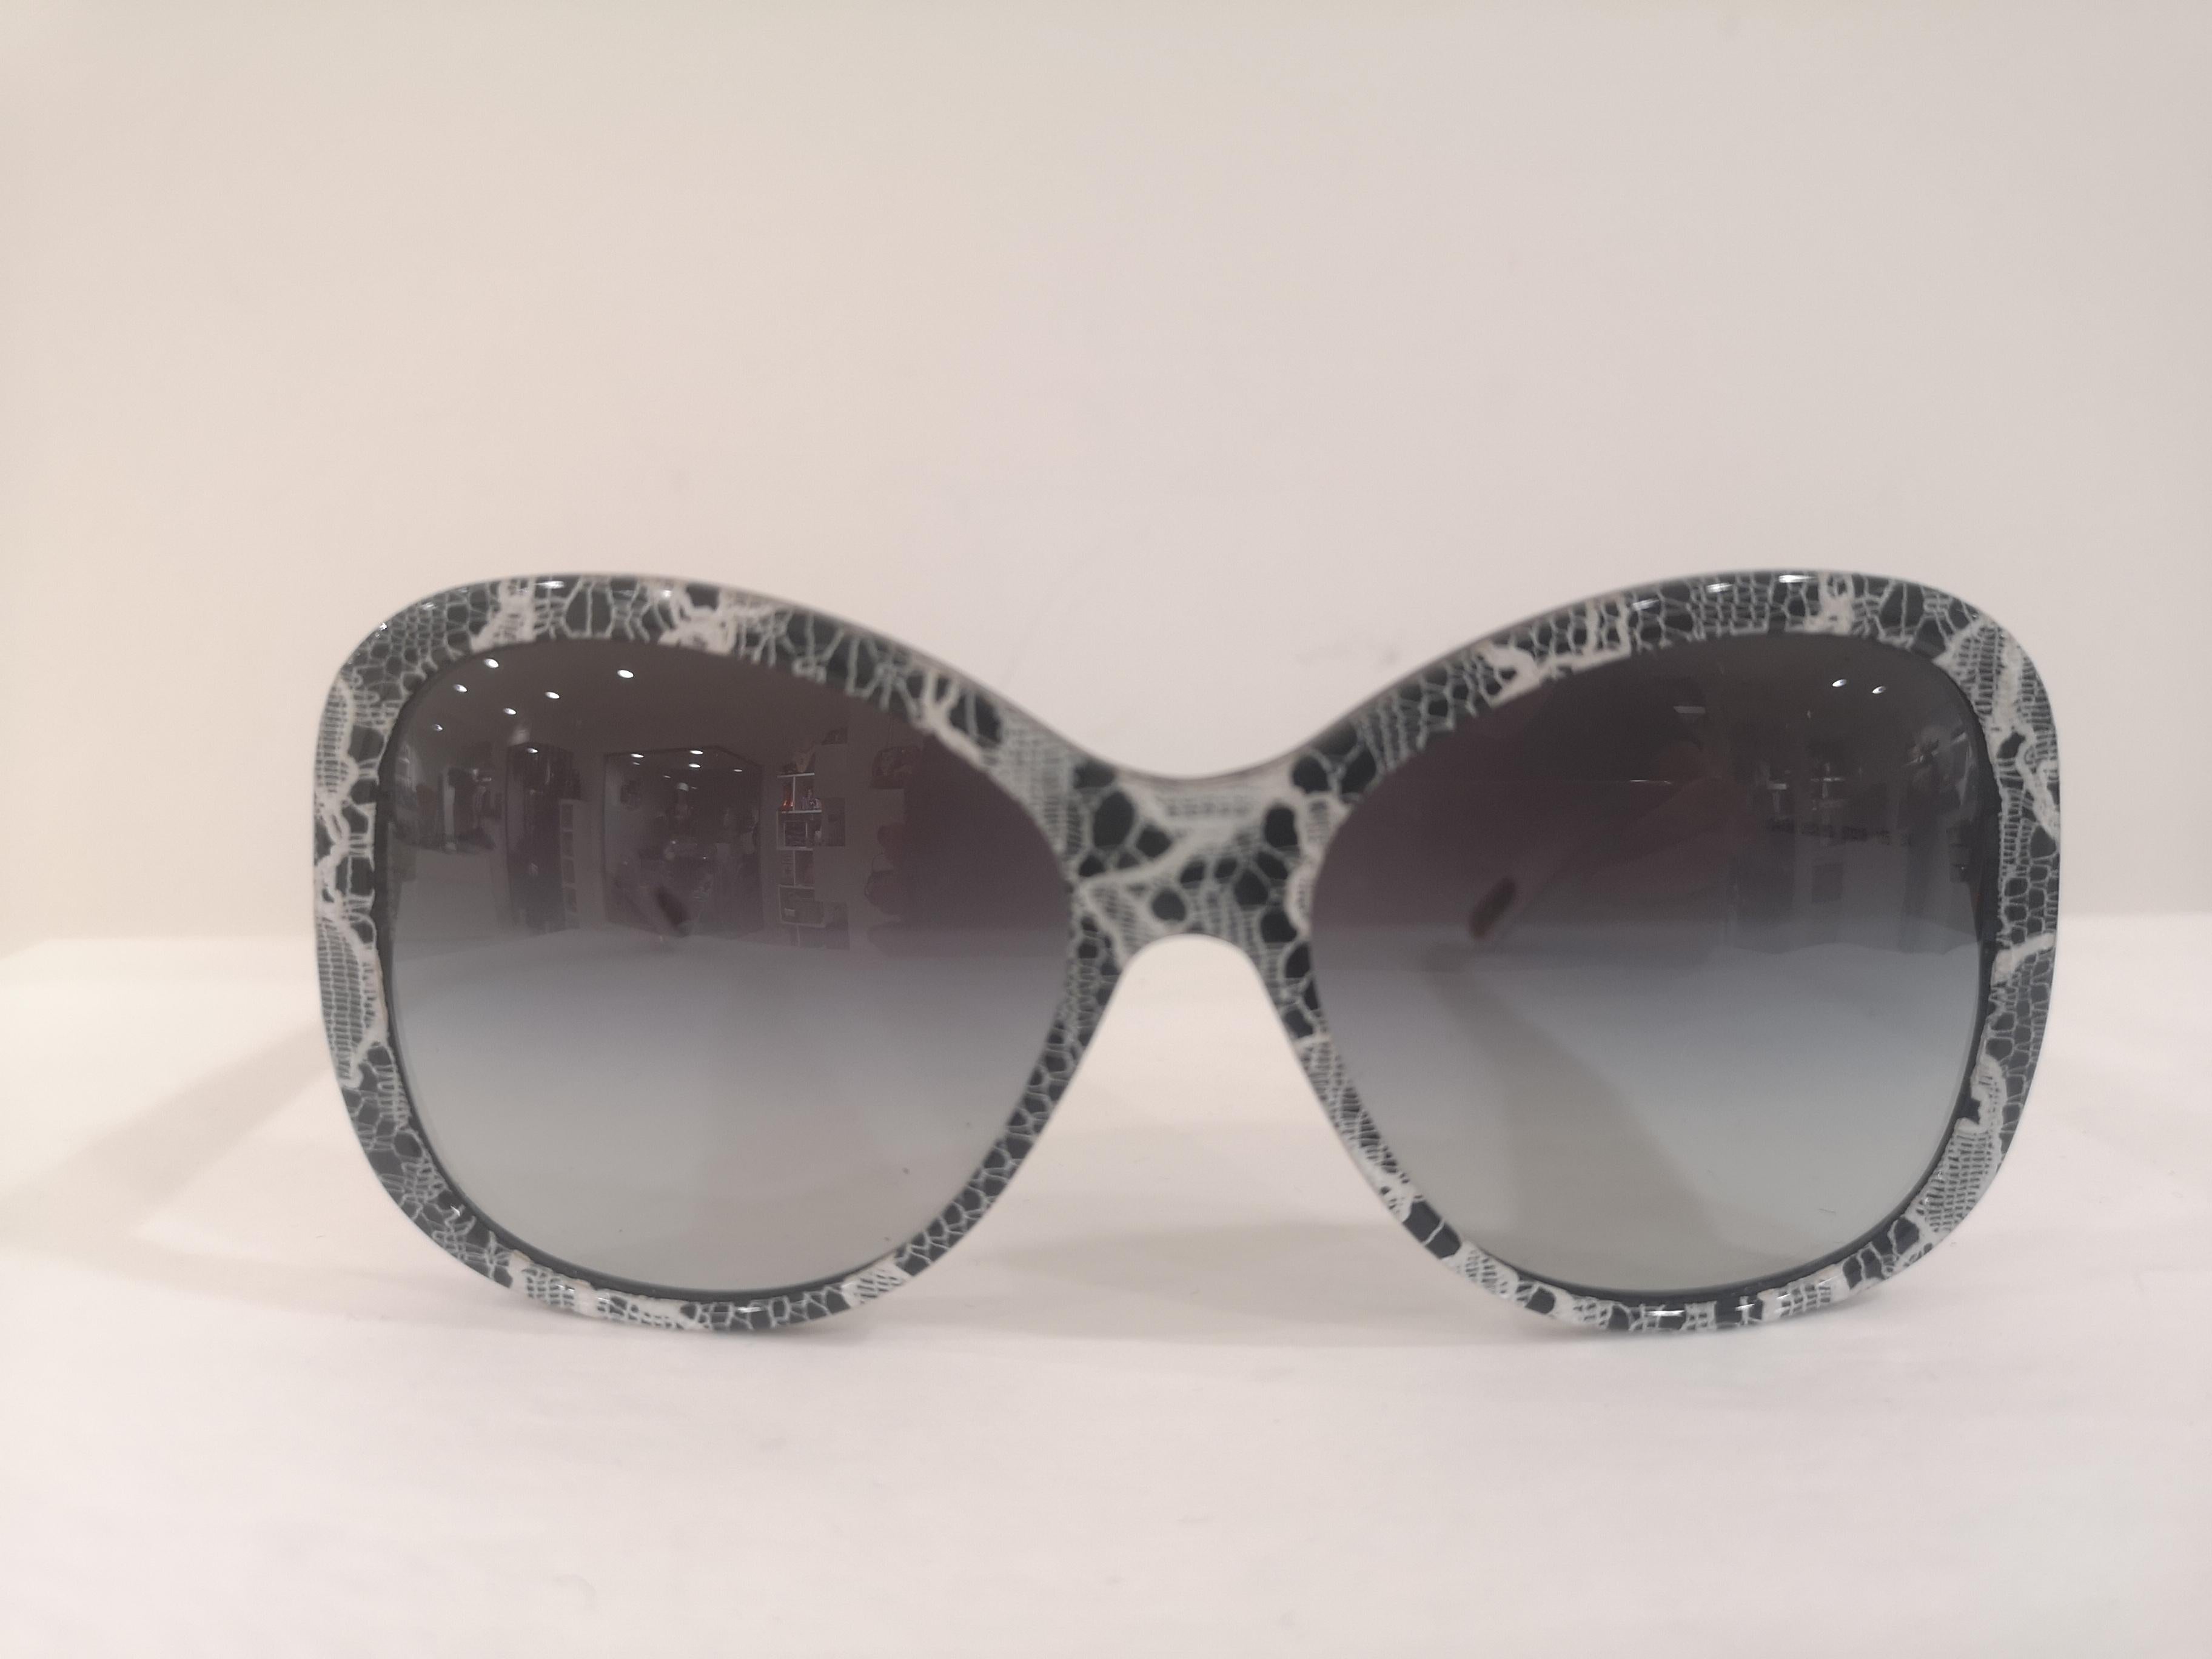 Dolce & Gabbana black white lace sunglasses
Totally made in italy still with box